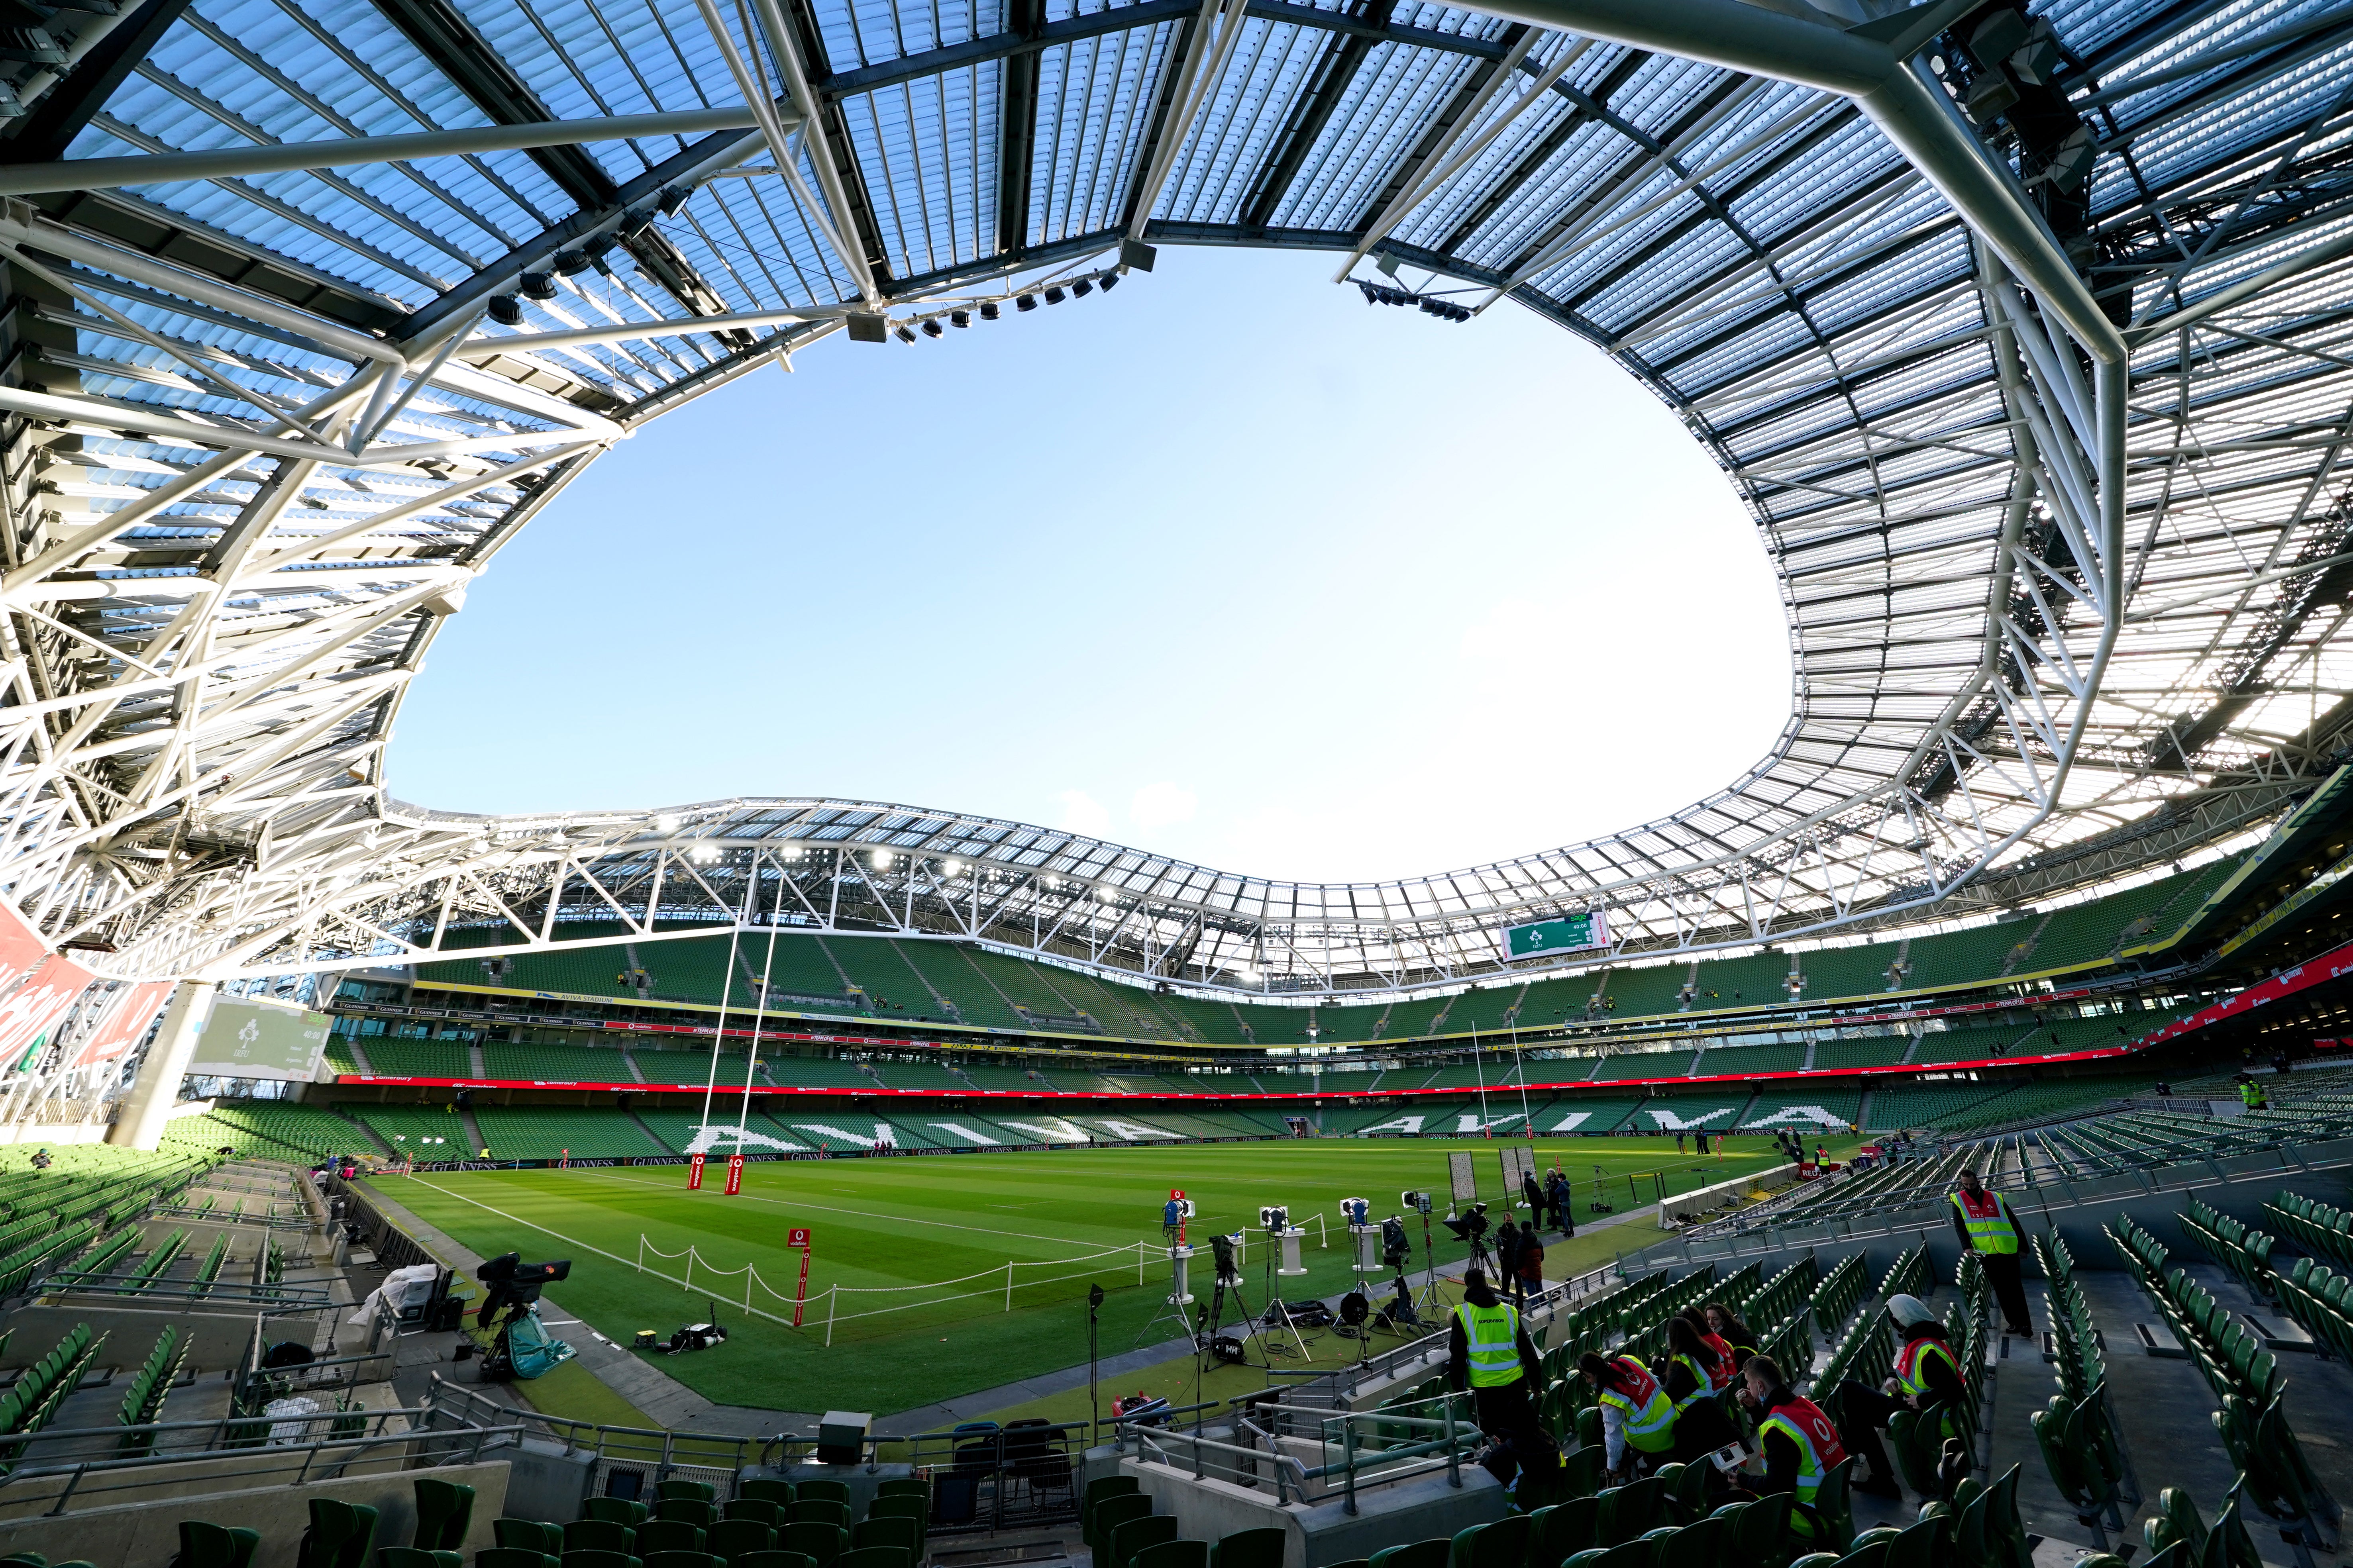 Dublin’s Aviva Stadium will have a capacity crowd for Wales’ Six Nations visit (Brian Lawless/PA)